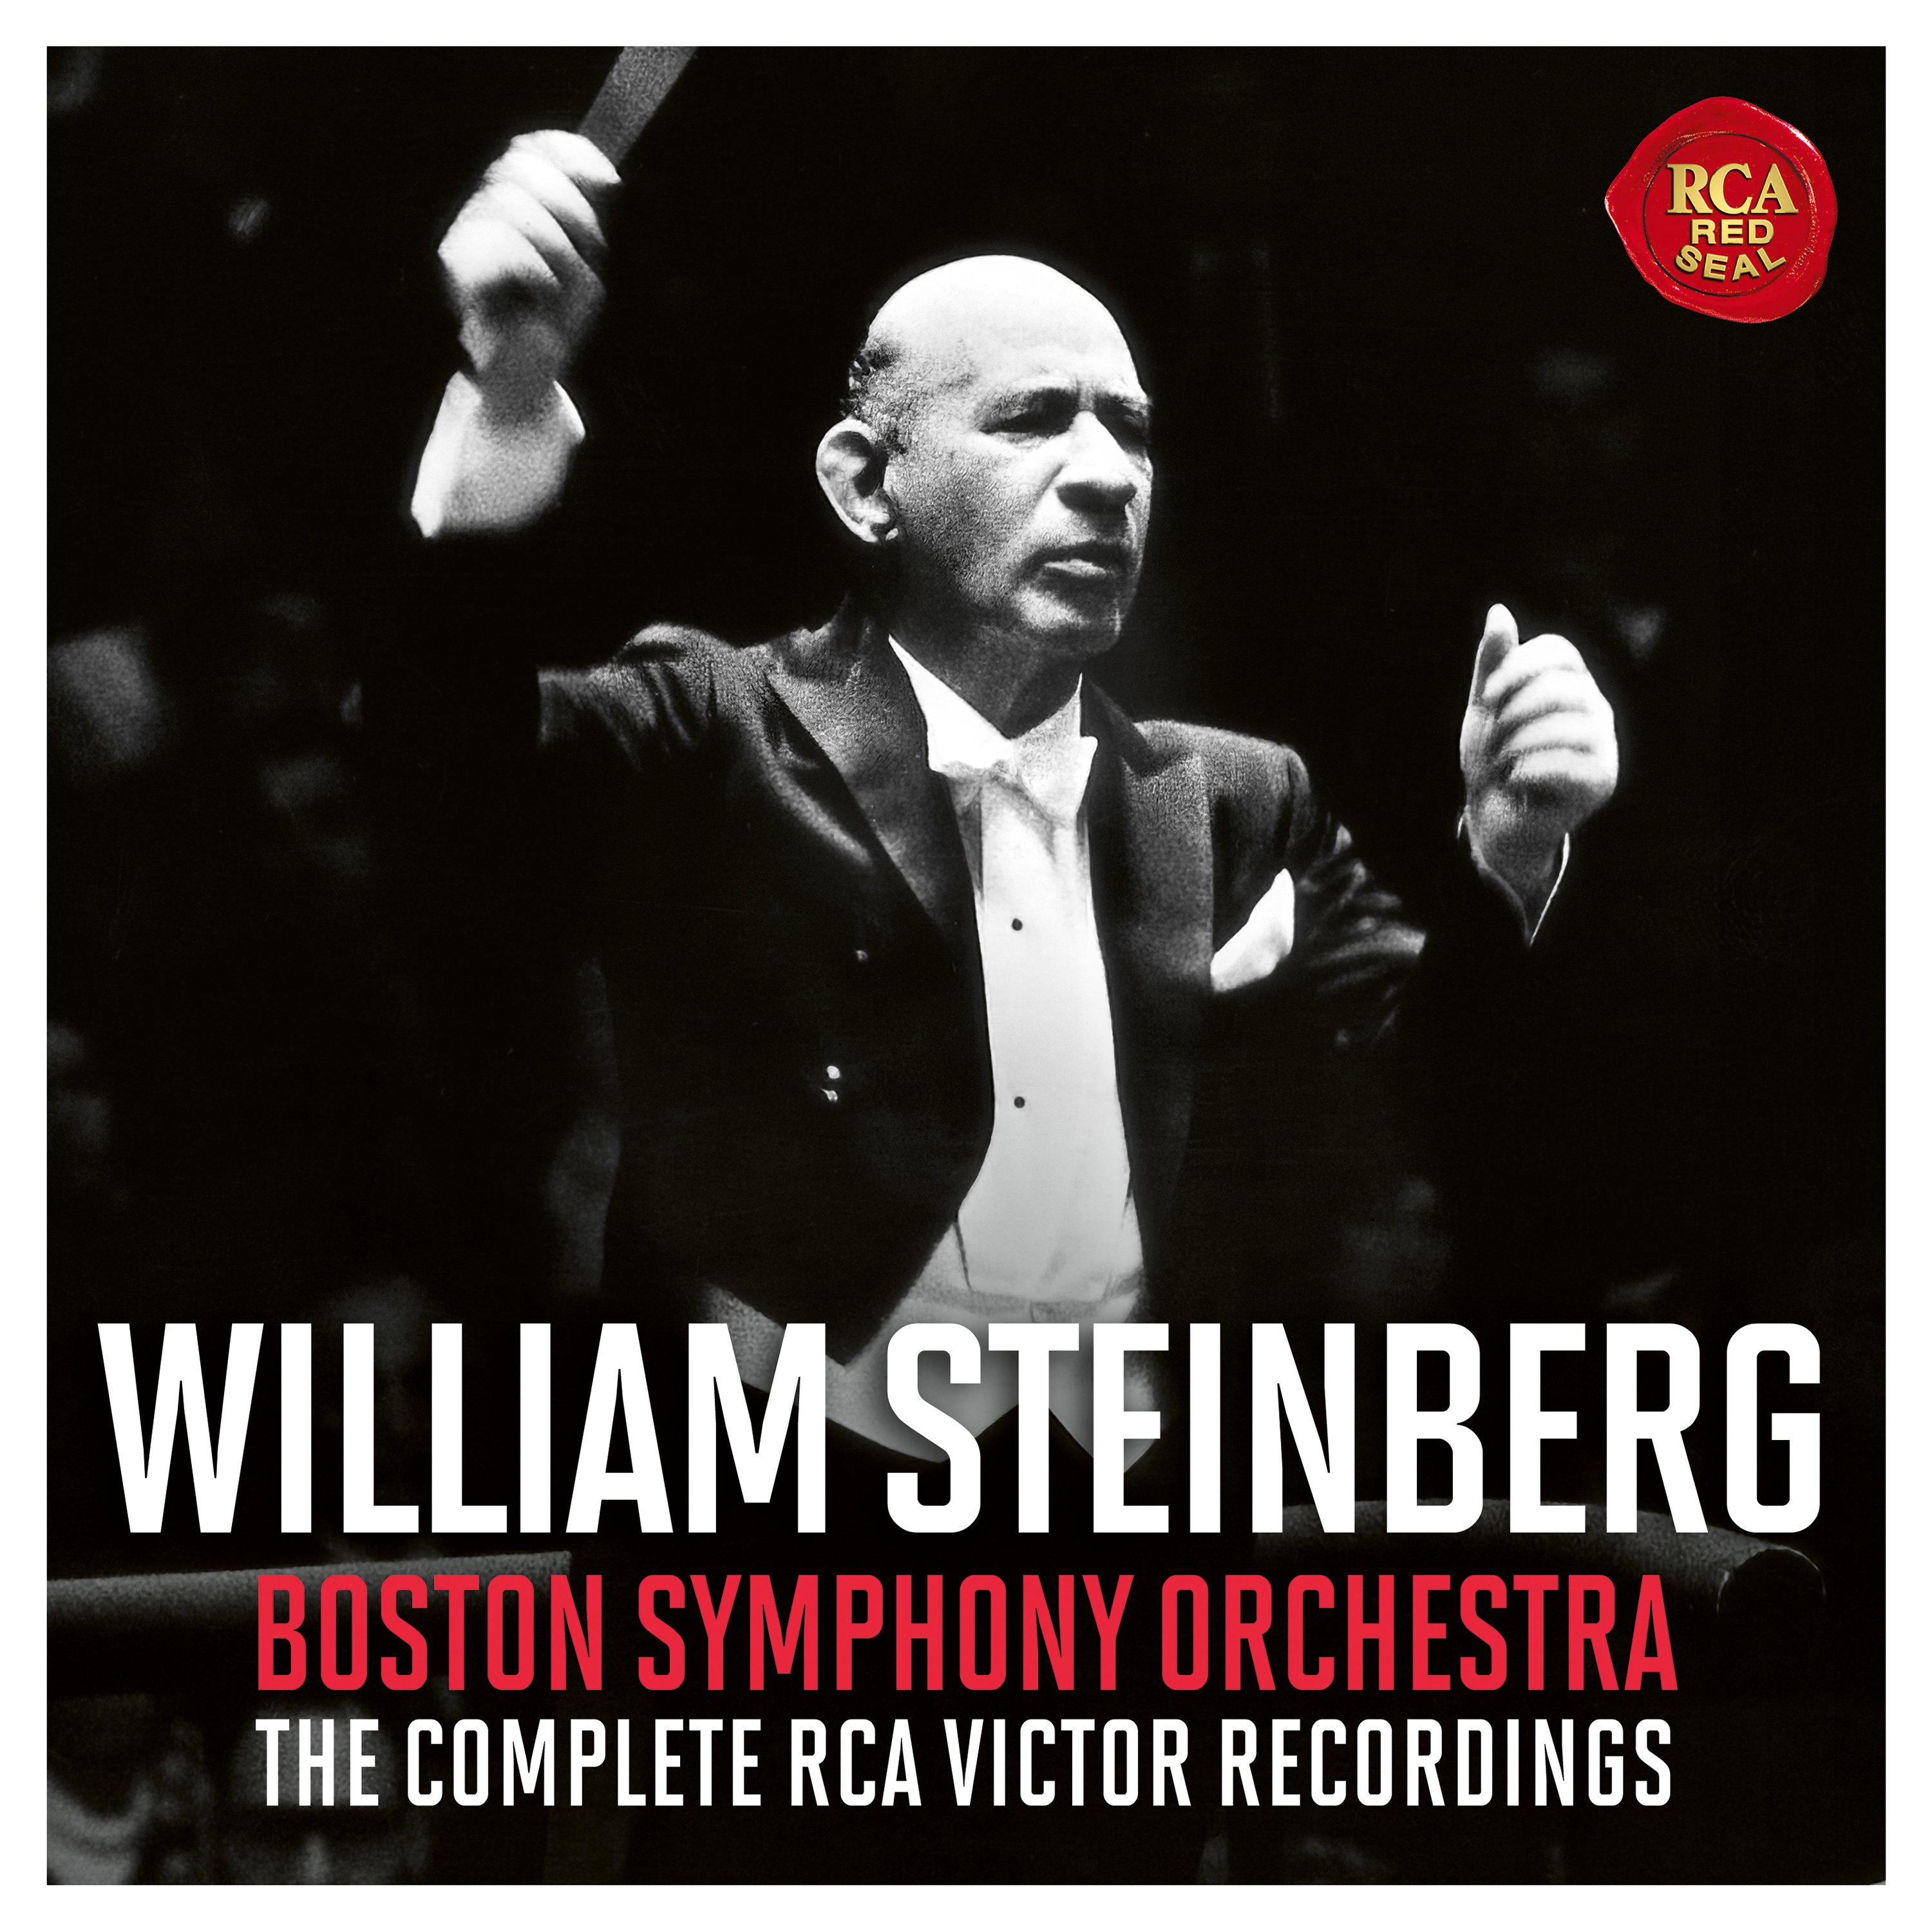 William Steinberg - William Steinberg - Boston Symphony Orchestra - The Complete RCA Victor Recordings